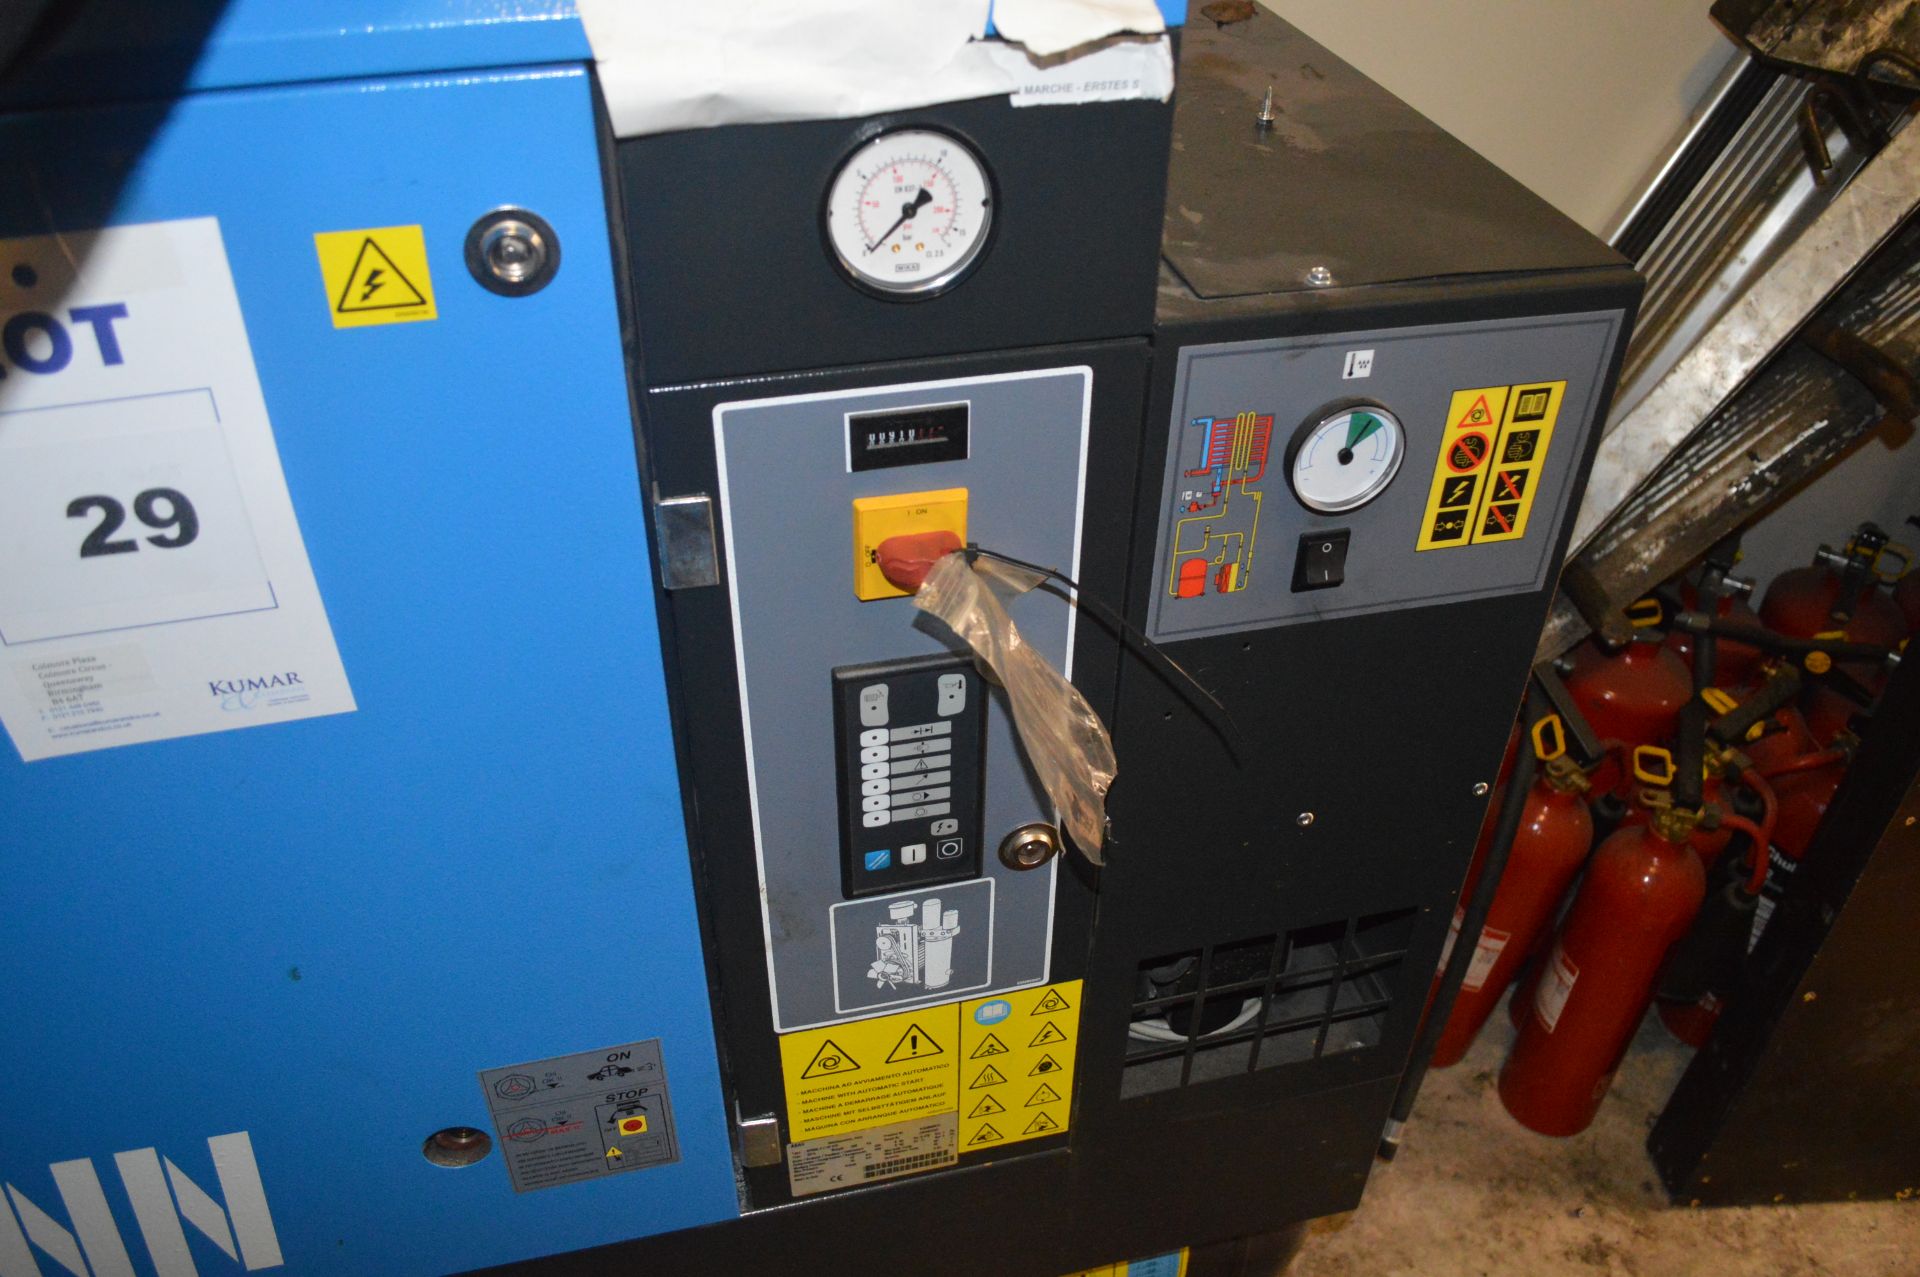 ABAC Receiver Mounted Air Compressor Type Spinn.E1110 270 Product NR 4152008073 Serial No. CAI682250 - Image 4 of 12